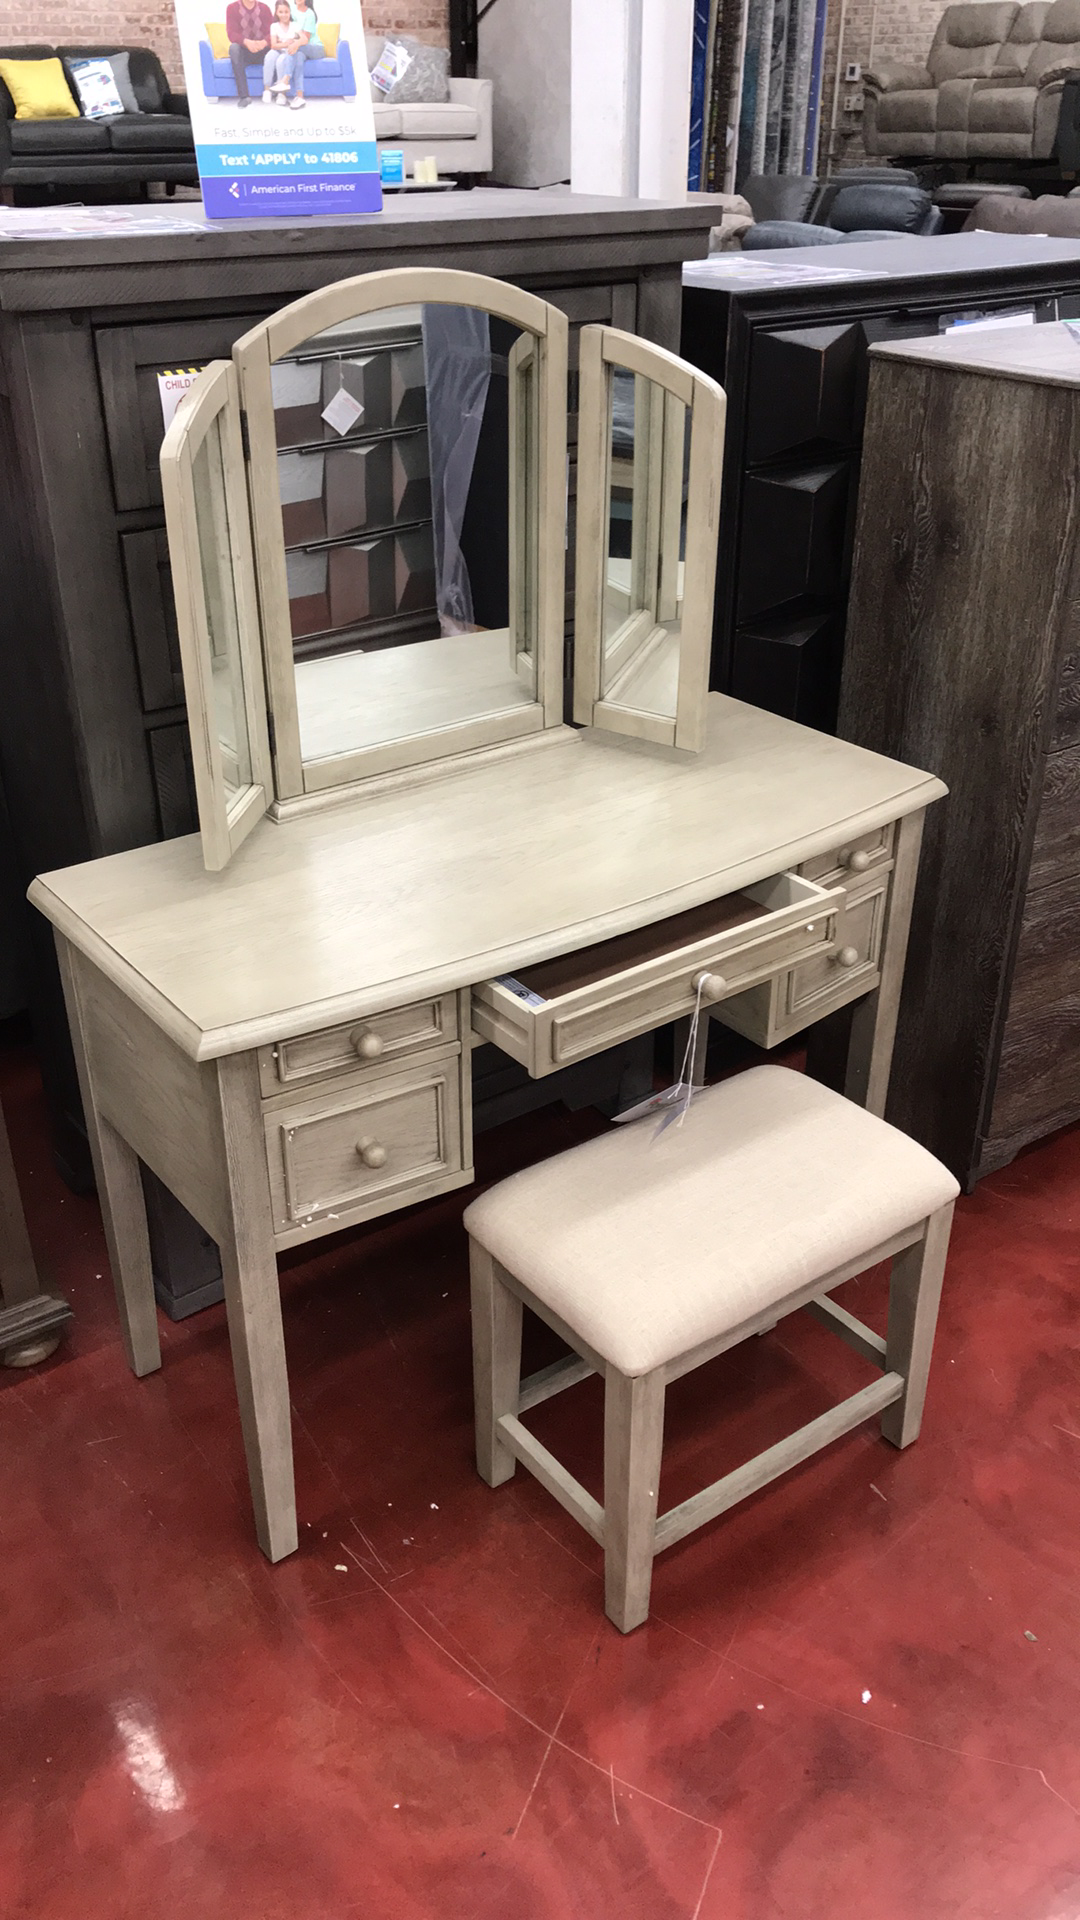 WEEKLY or MONTHLY. Melania Beauty Vanity and Bench